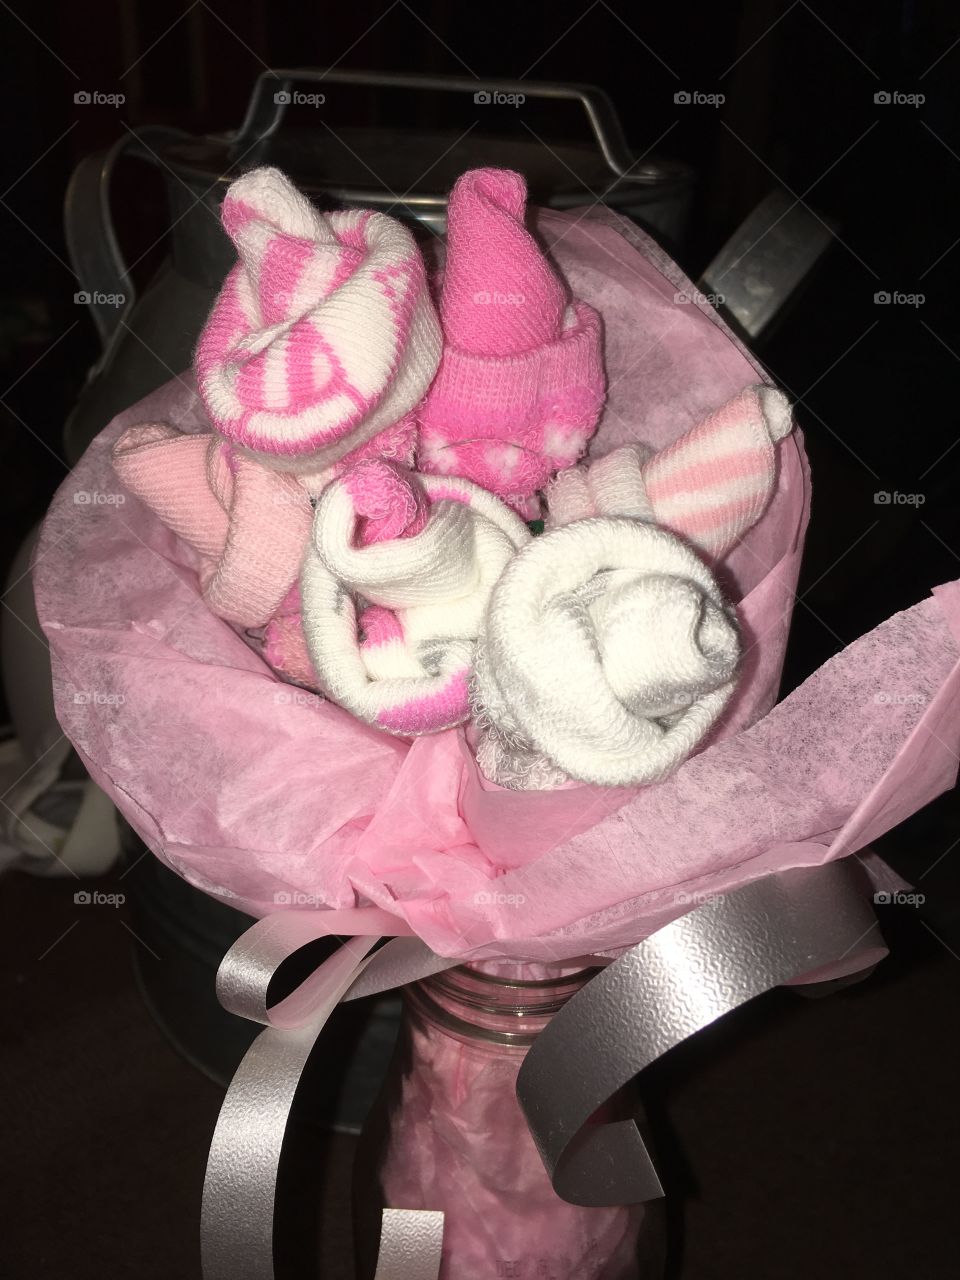 Homemade bouquet made from baby socks